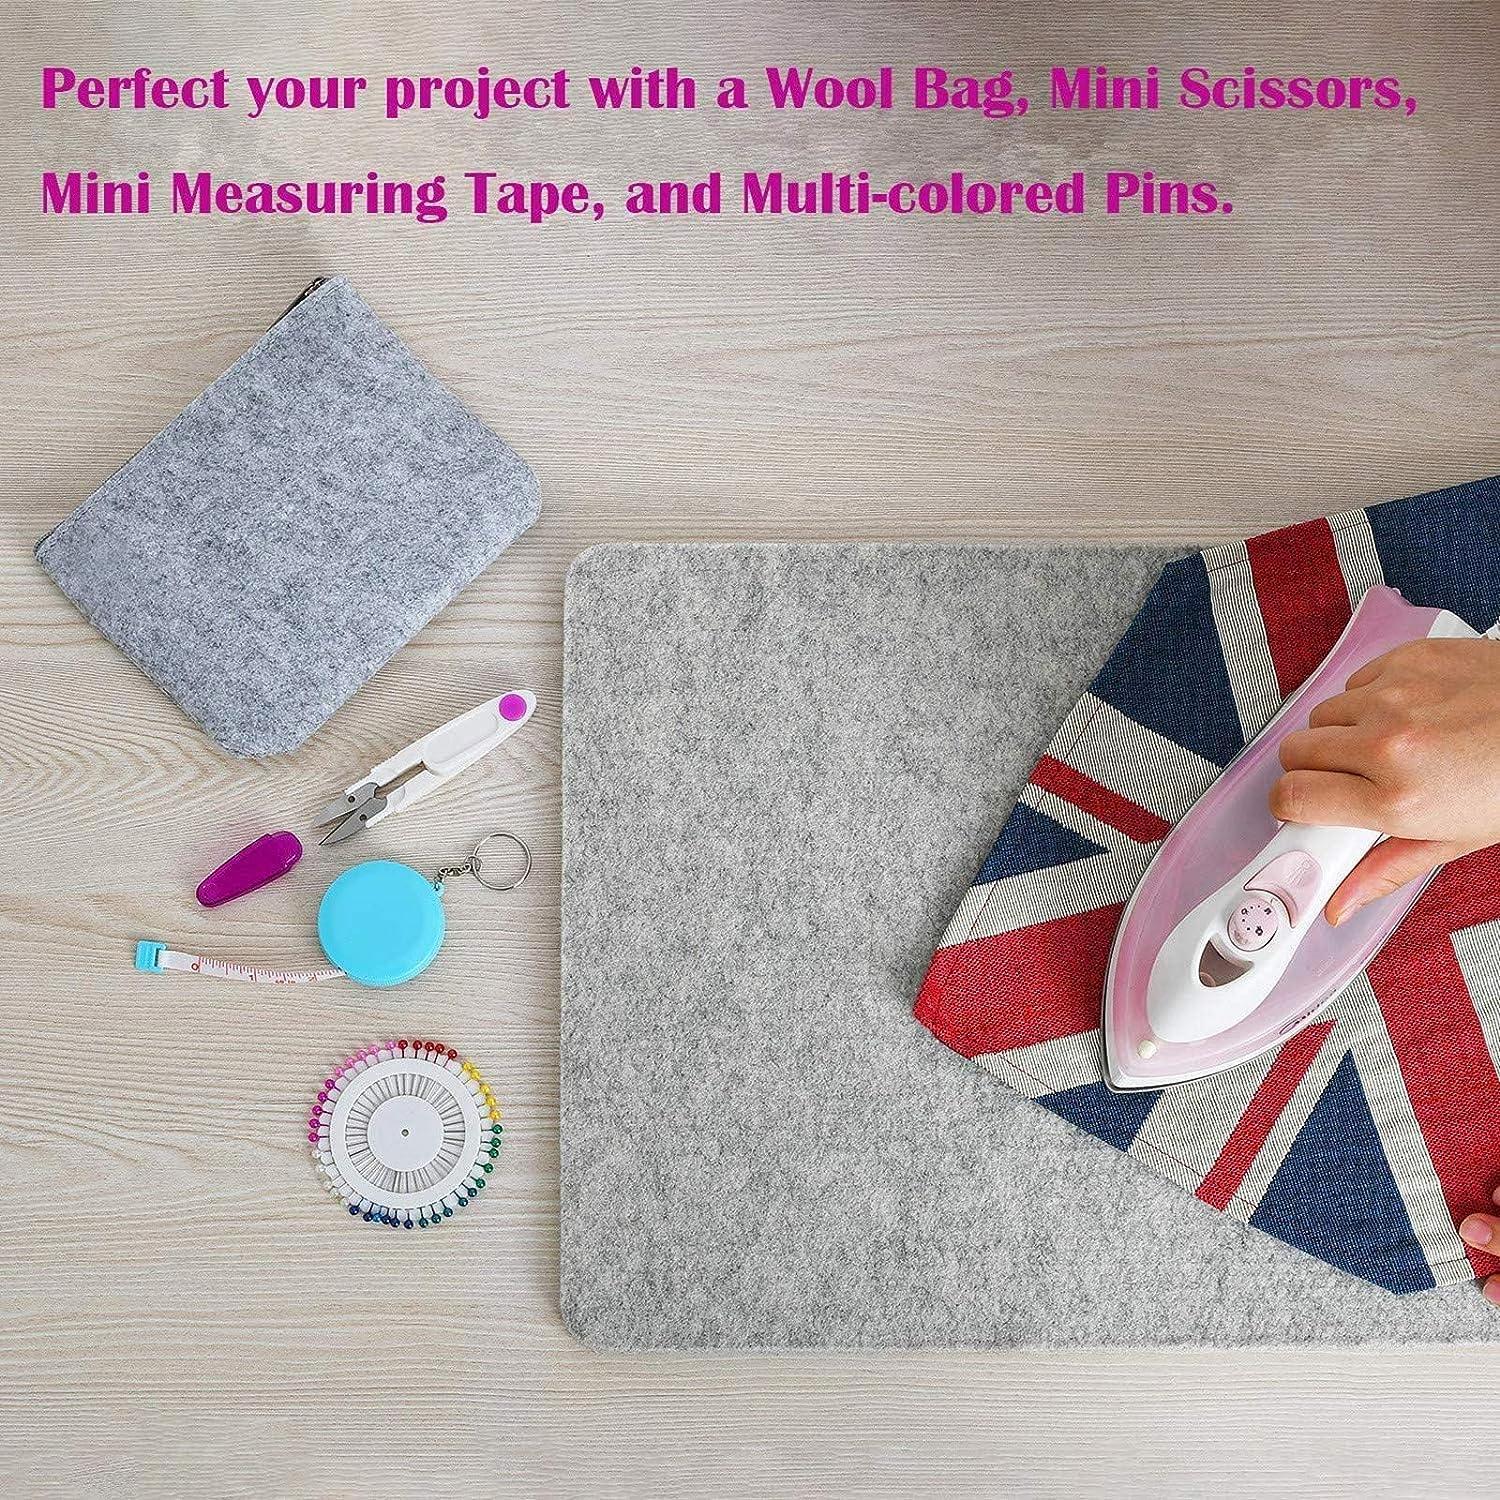  Wool Pressing Mat, 2 Packs 17 x 13.5 Quilting Ironing Pad  Quality Felted Wool Ironing Mat for Ironing Sewing Quilting Supplies Sewing  Supplies Notions, Comes with Silicone Iron Pad